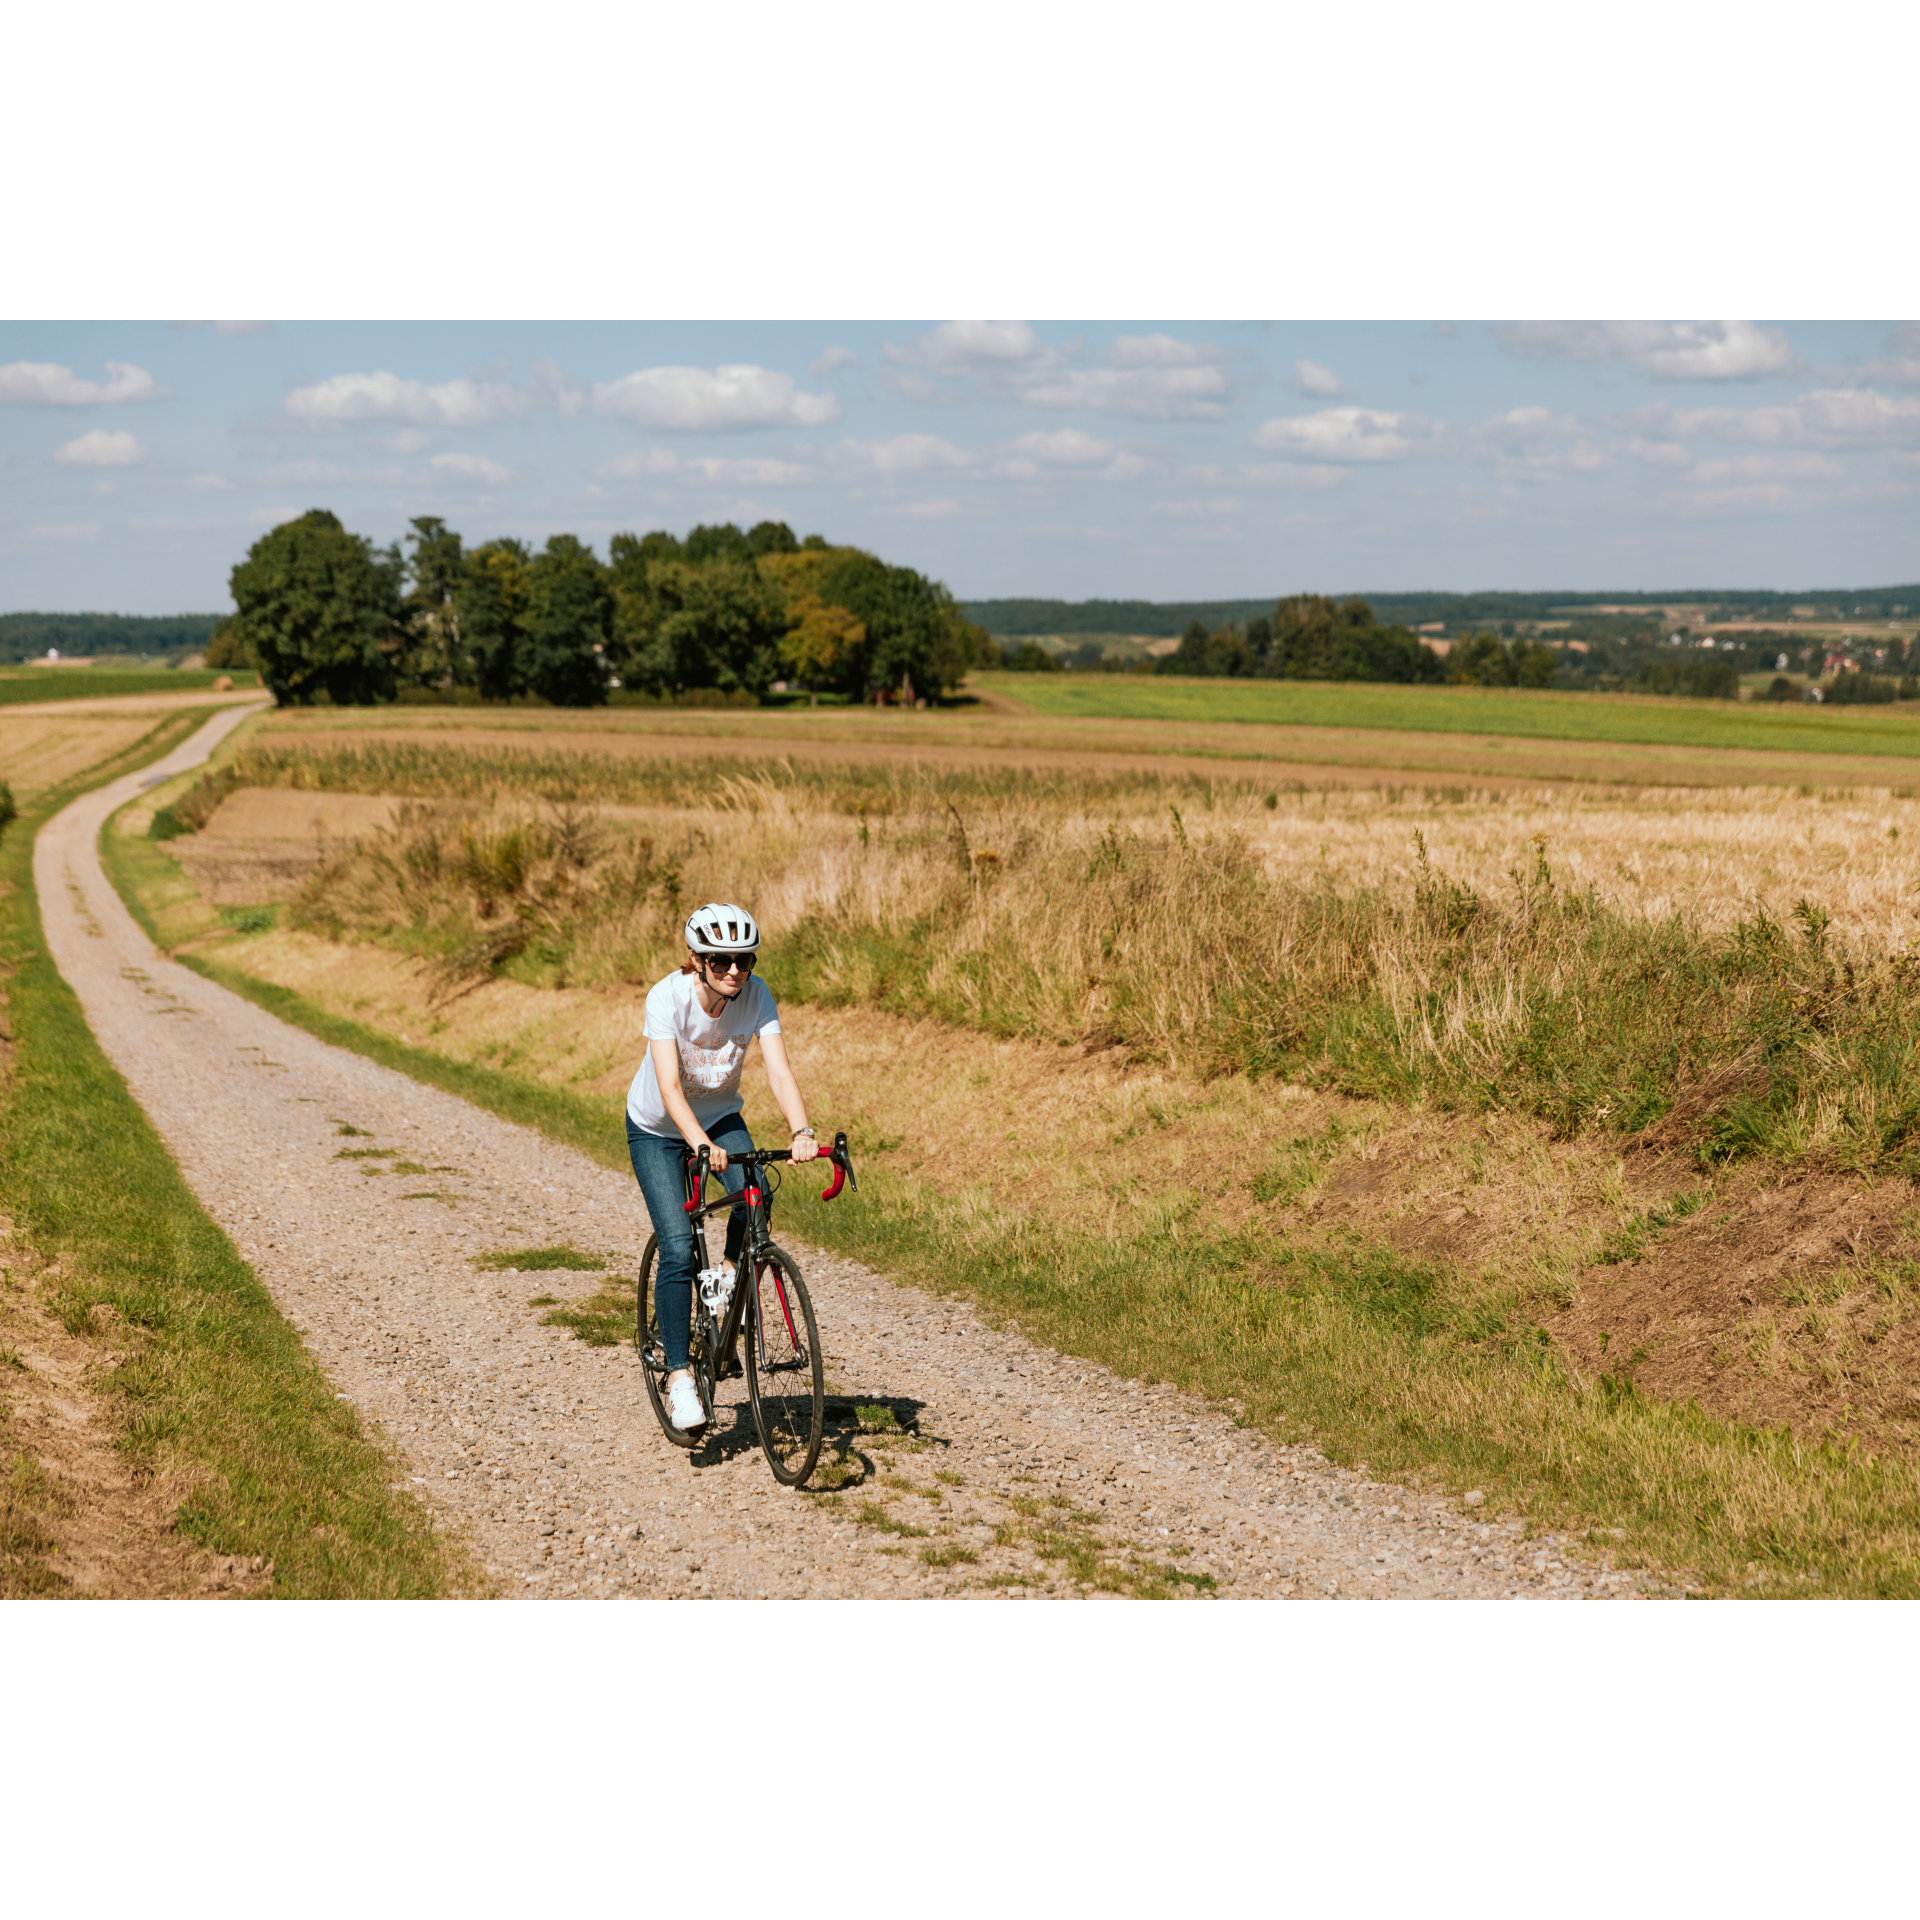 Cyclist on a gravel road